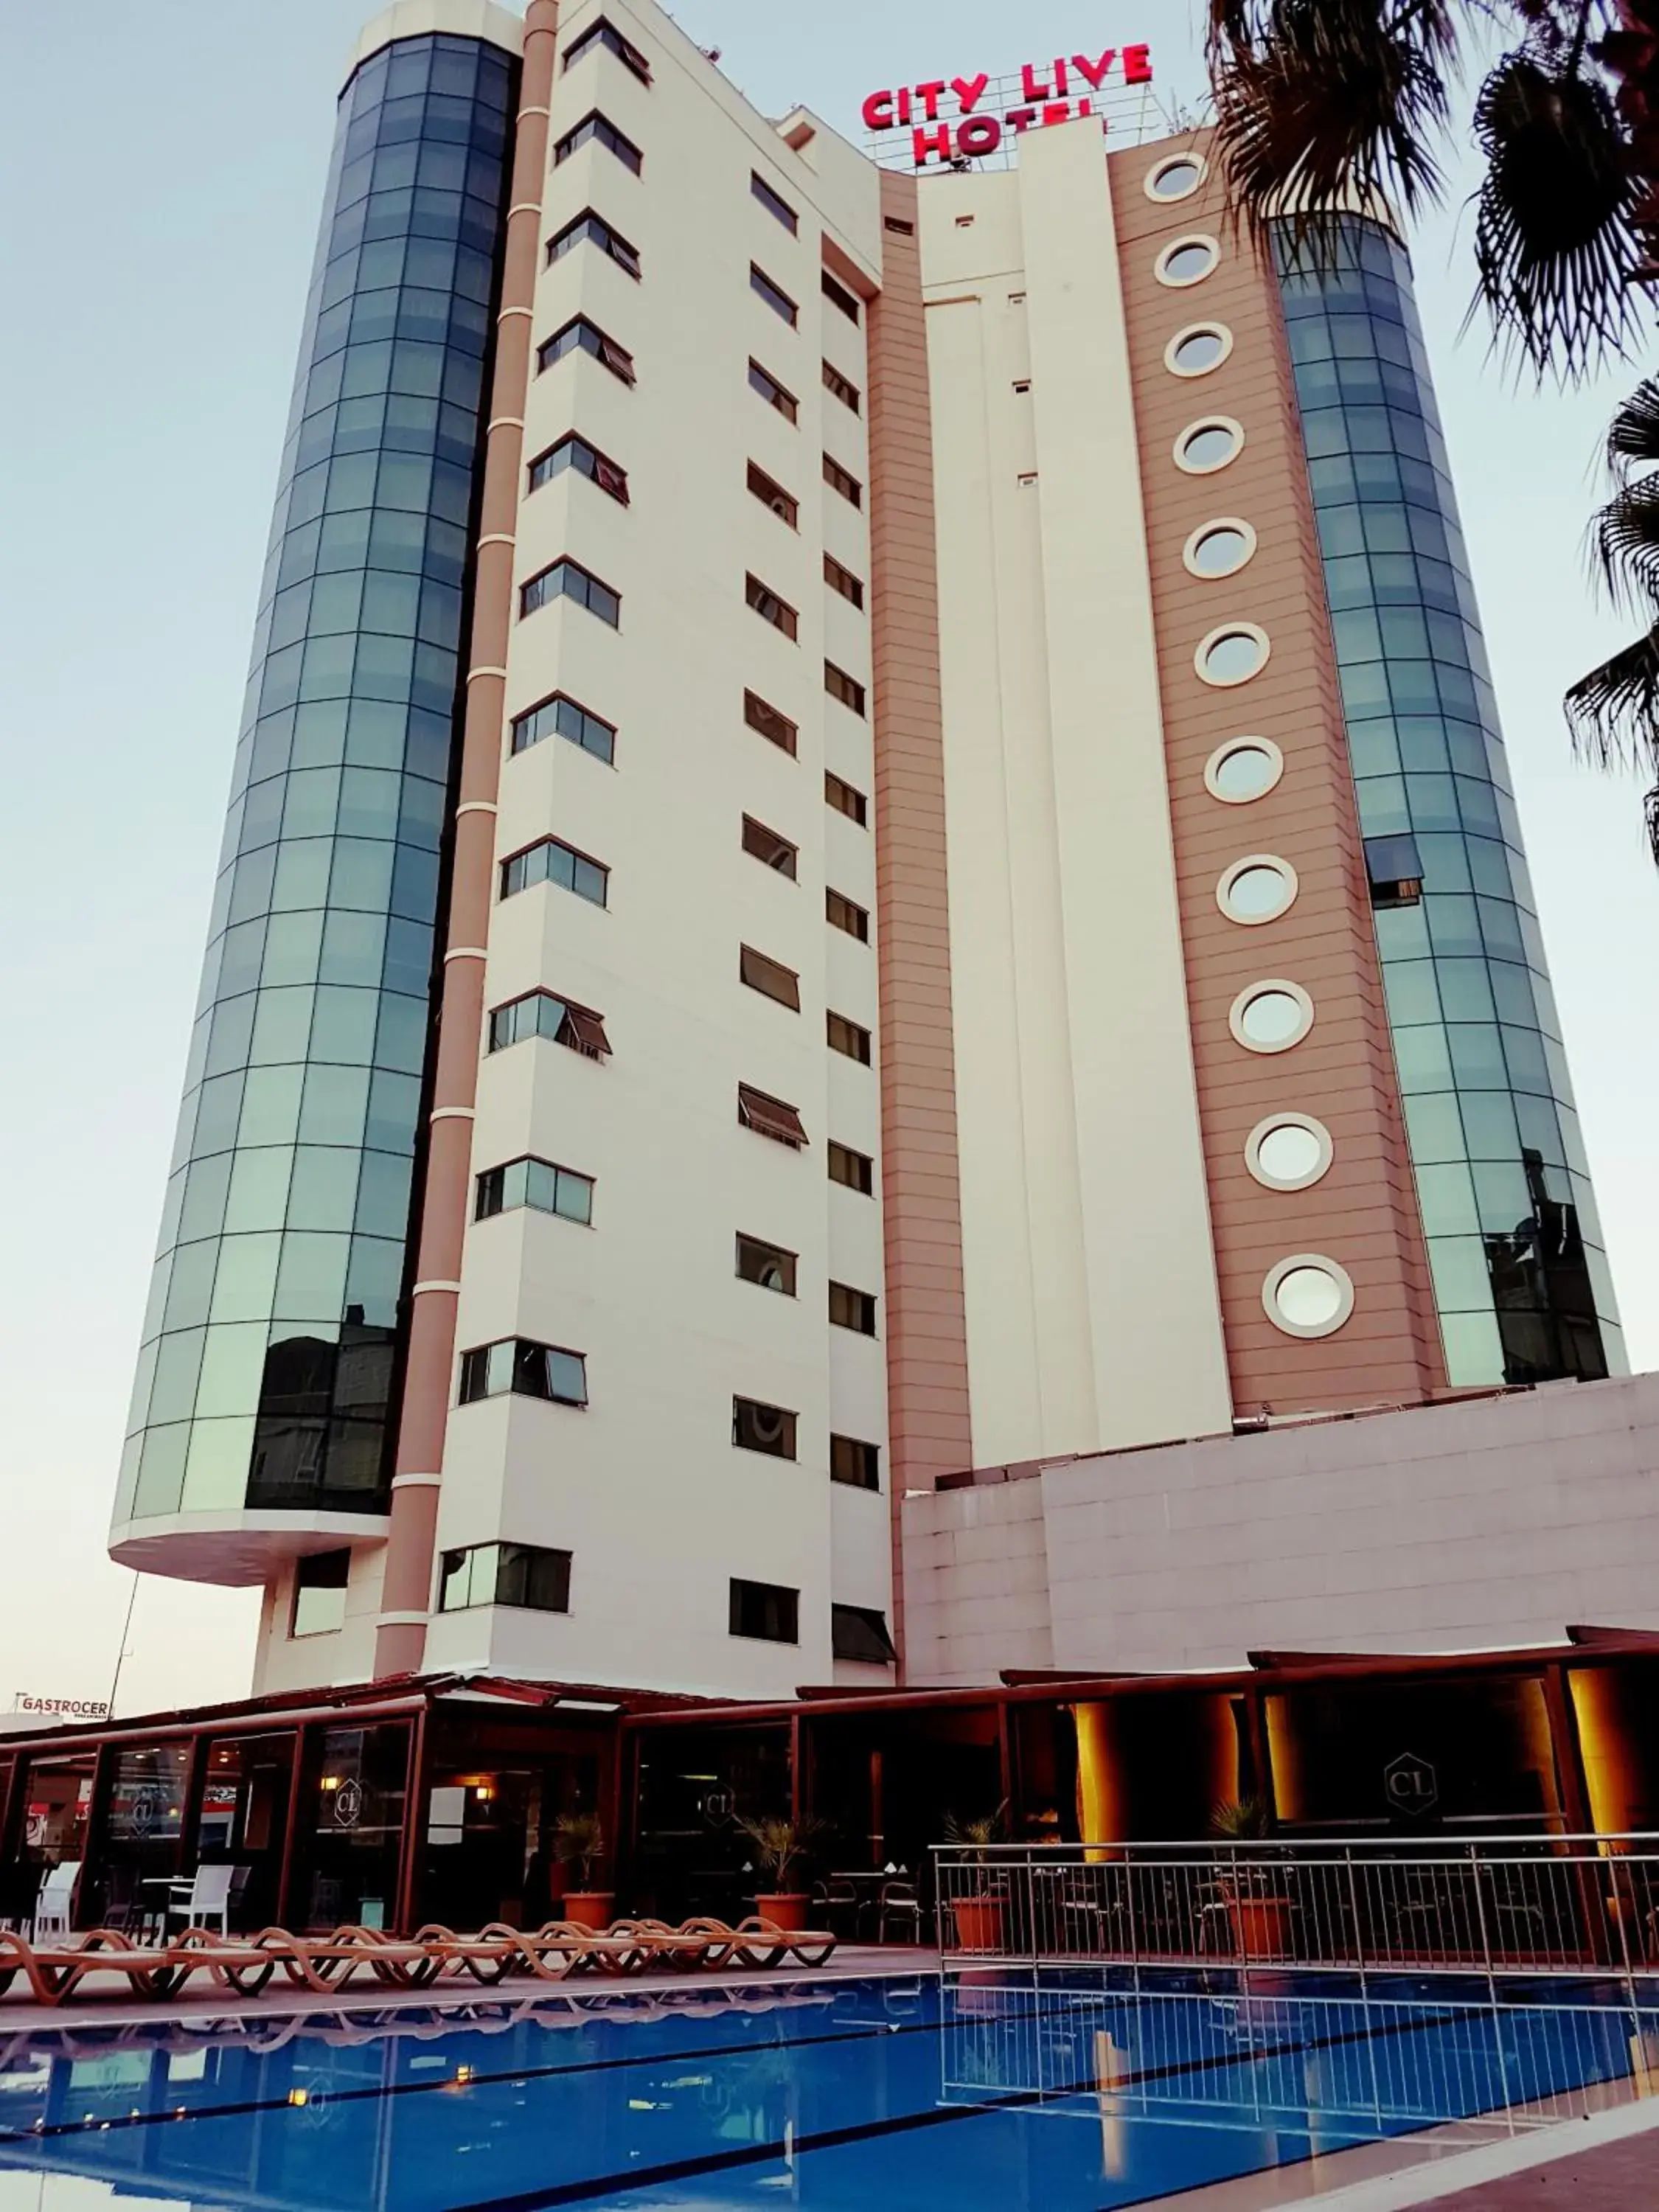 Property Building in City Live Hotel